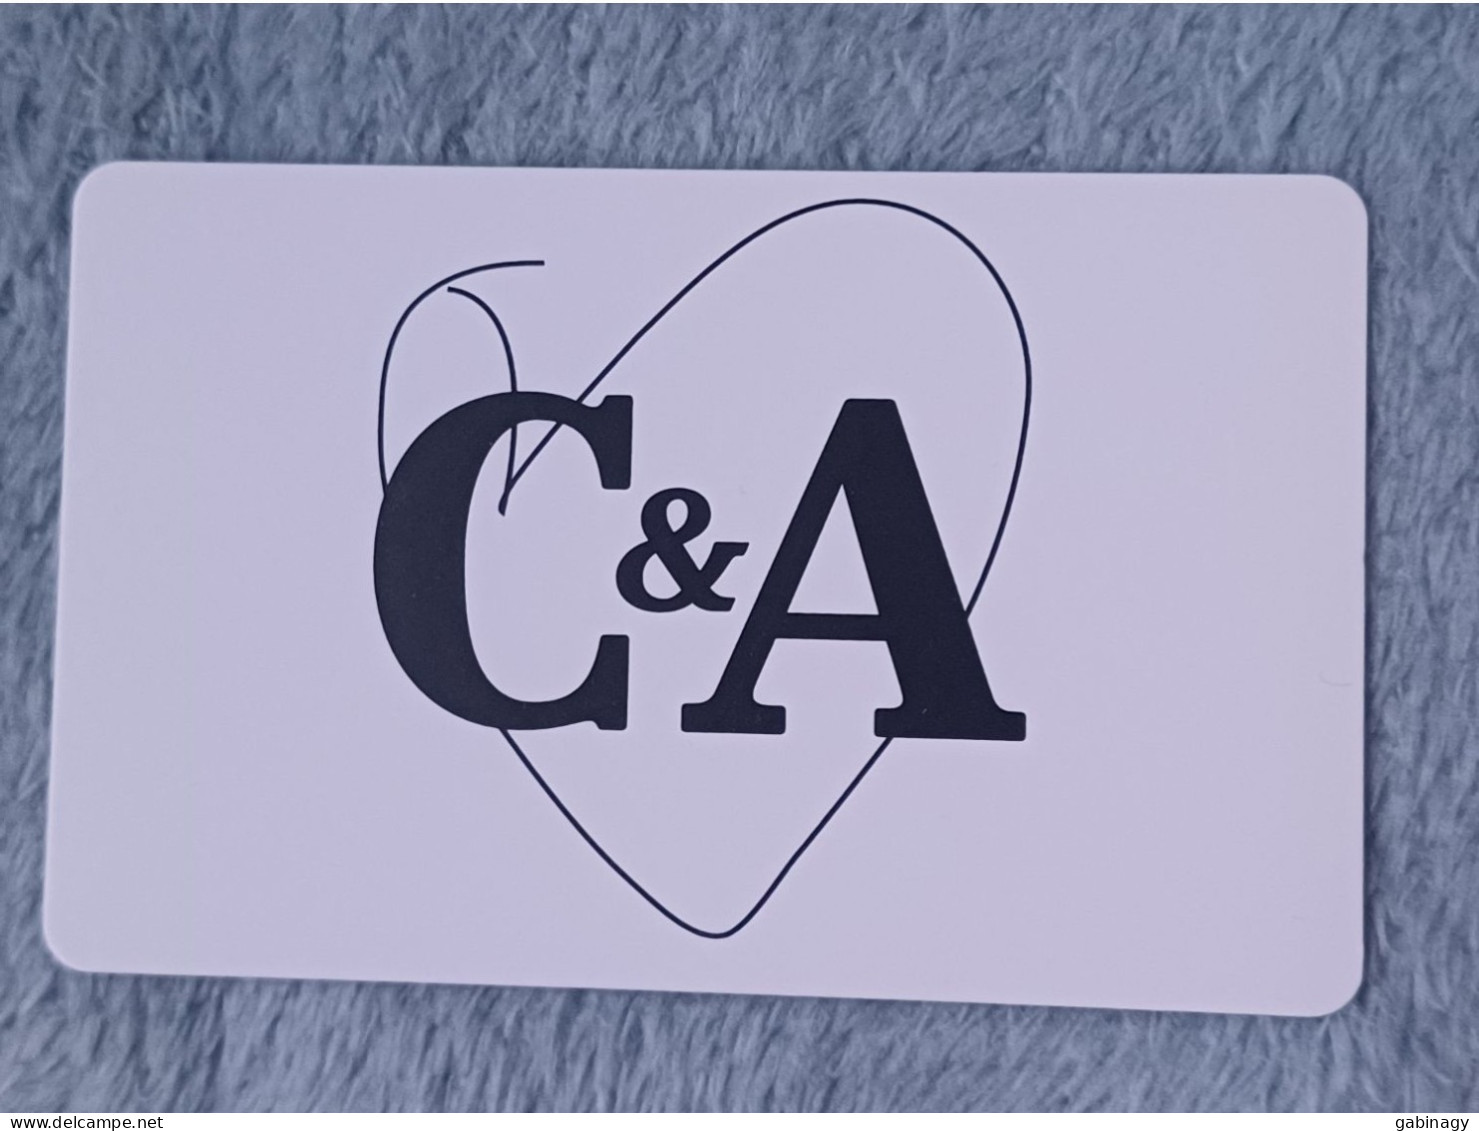 GIFT CARD - HUNGARY - C&A 36 - Gift Cards